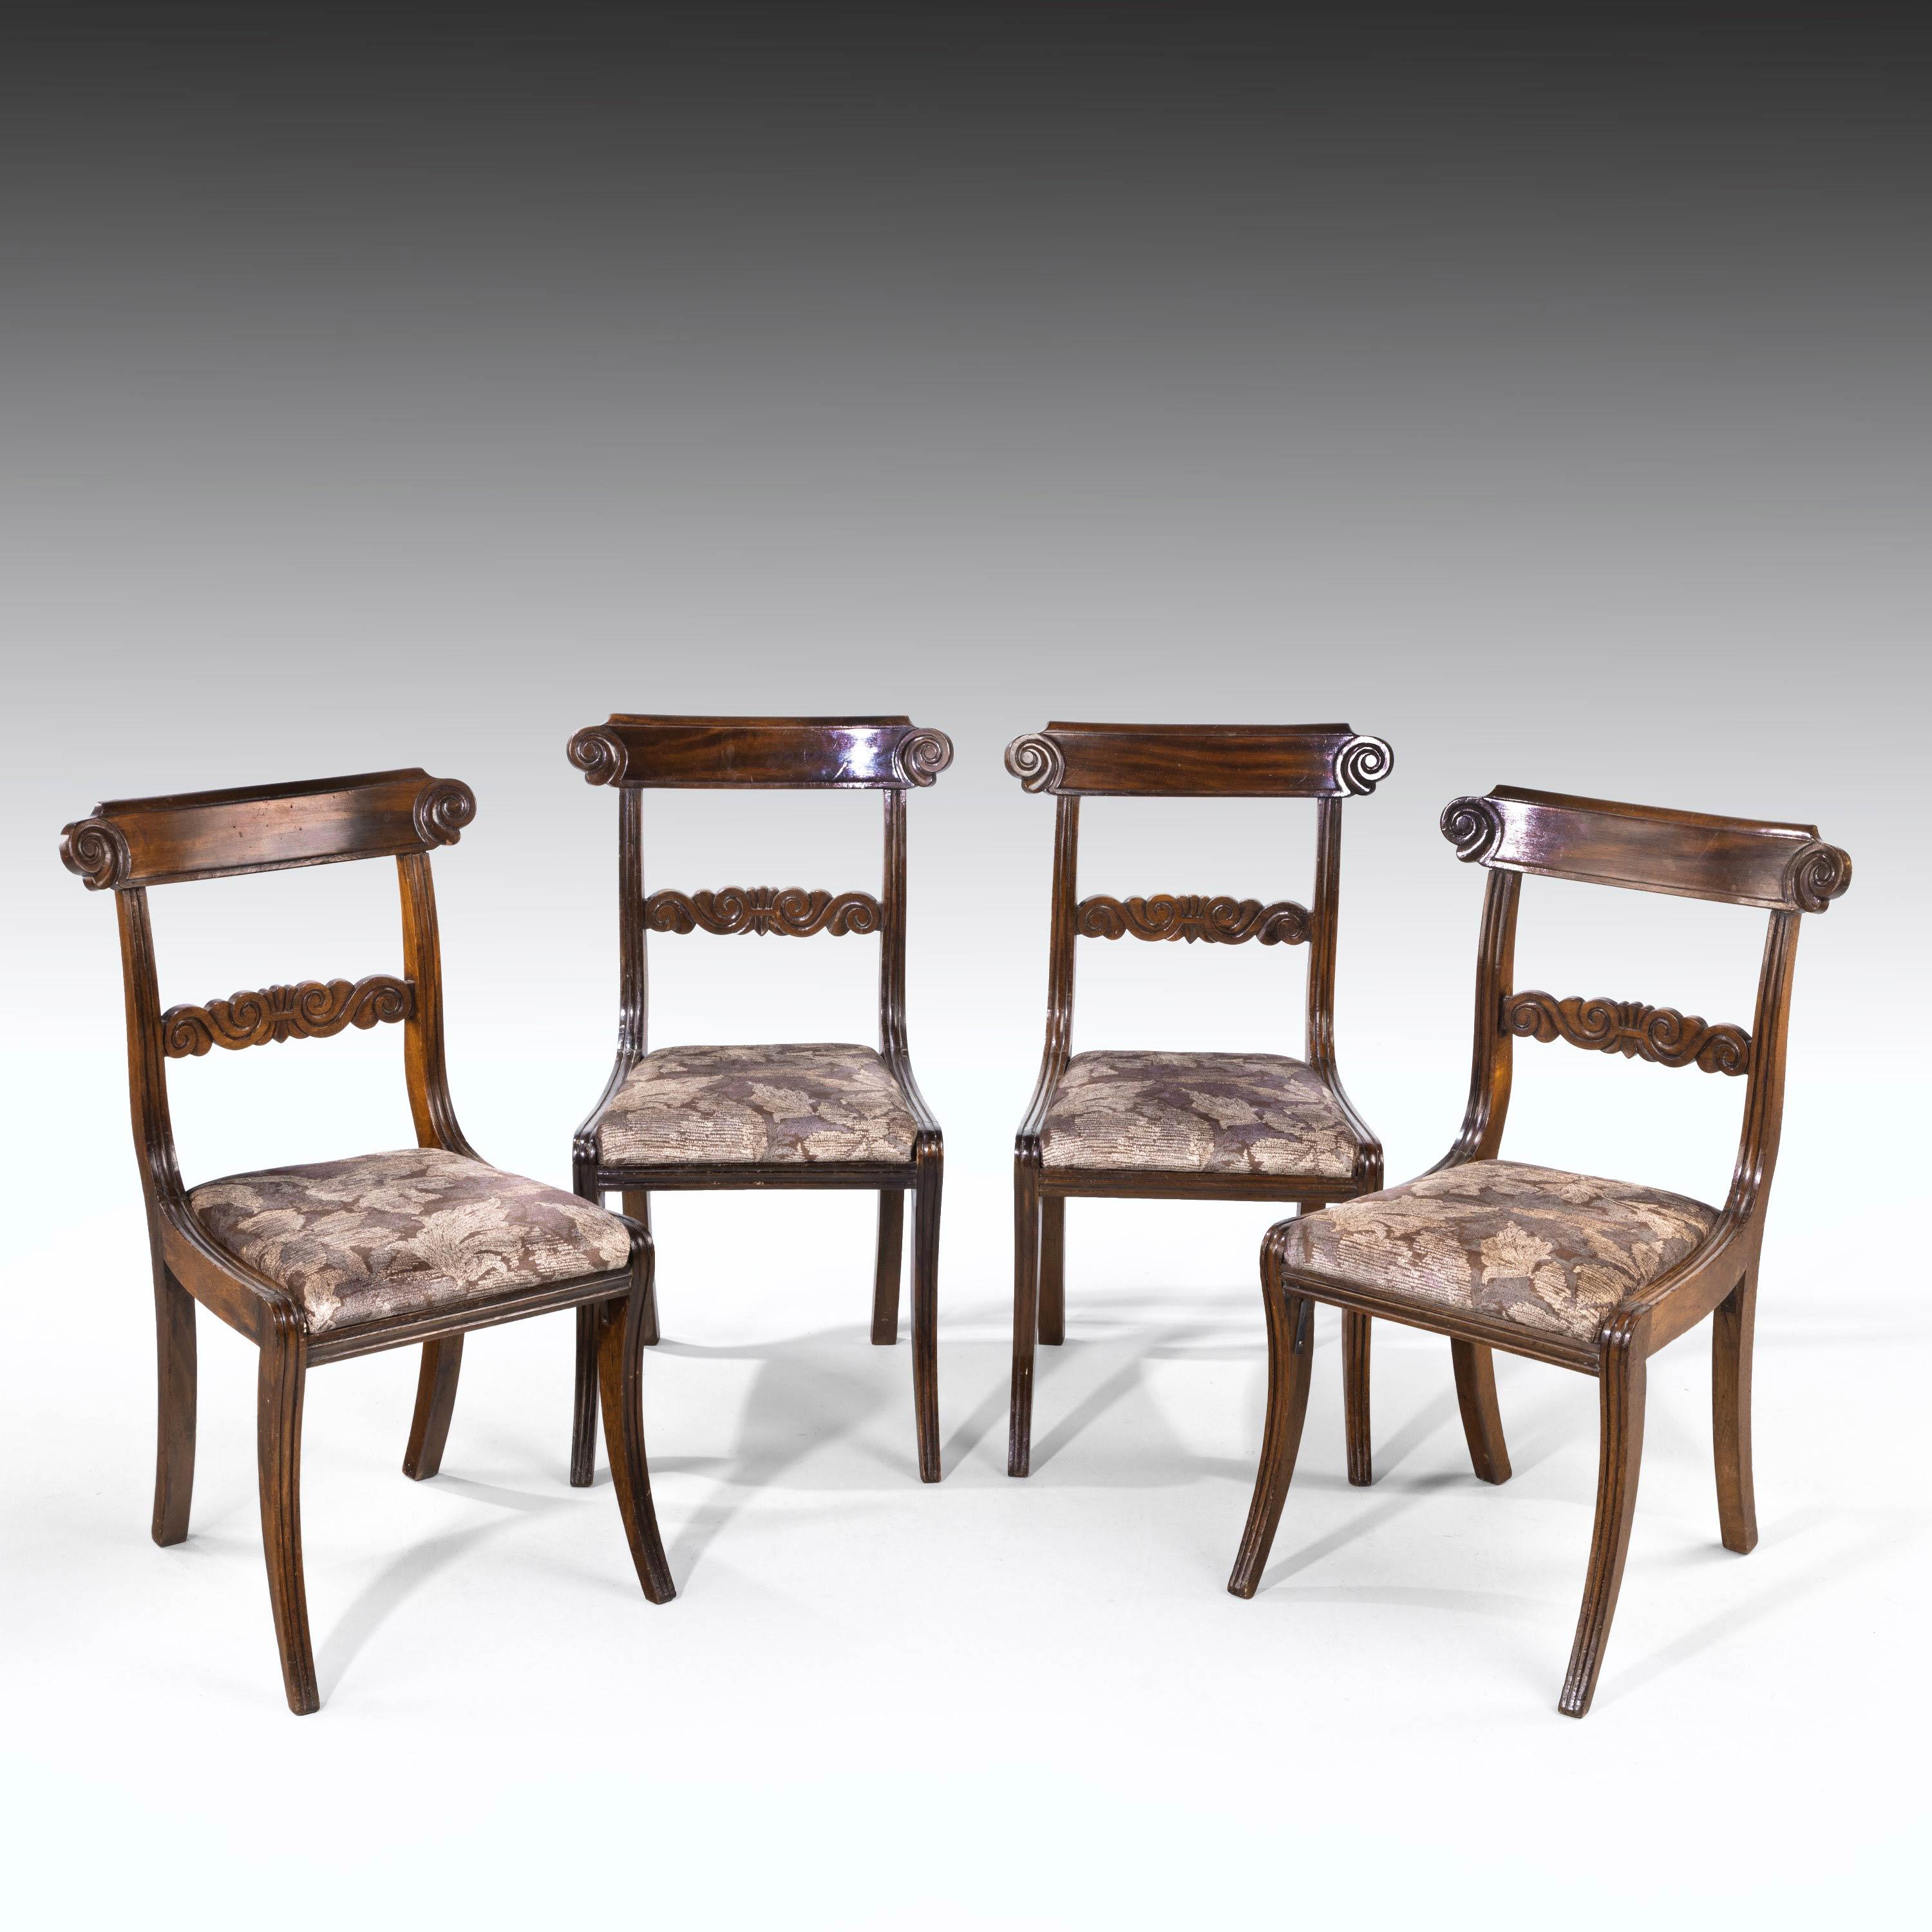 A good and original set of Regency period sabre legged mahogany framed chairs. The backs with scrolled details to the top splat. Reeded throughout the uprights.
Measures: Seat height 18